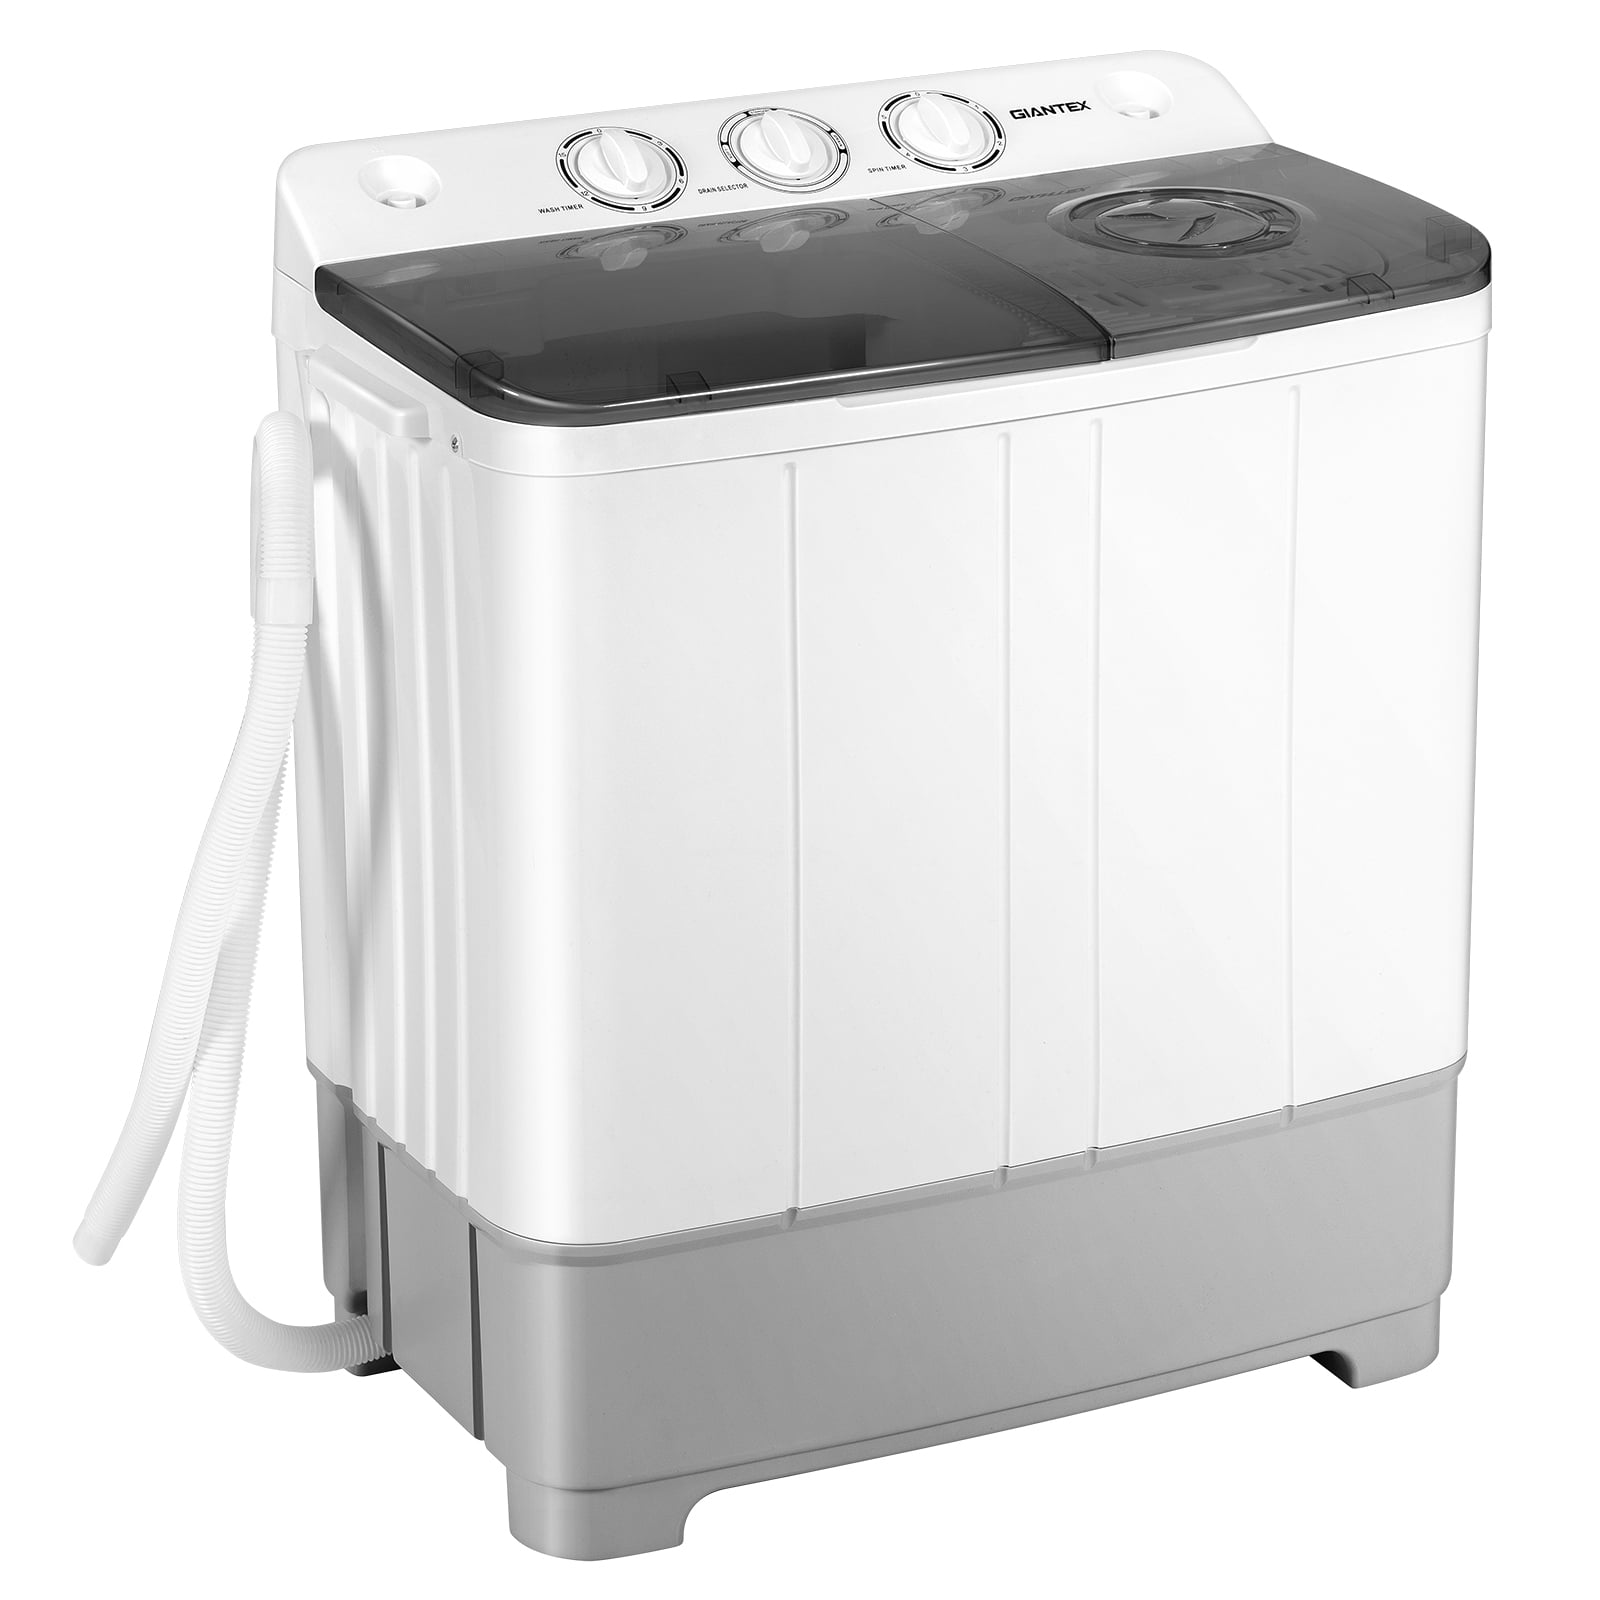 Nictemaw Compact Twin Tub Portable Mini Washing Machine， Washer 13.2lbs Semi-Automatic with Time Control Function for Bathroom,Apartments 8lbs Black RV Camping &Spiner Dorms 